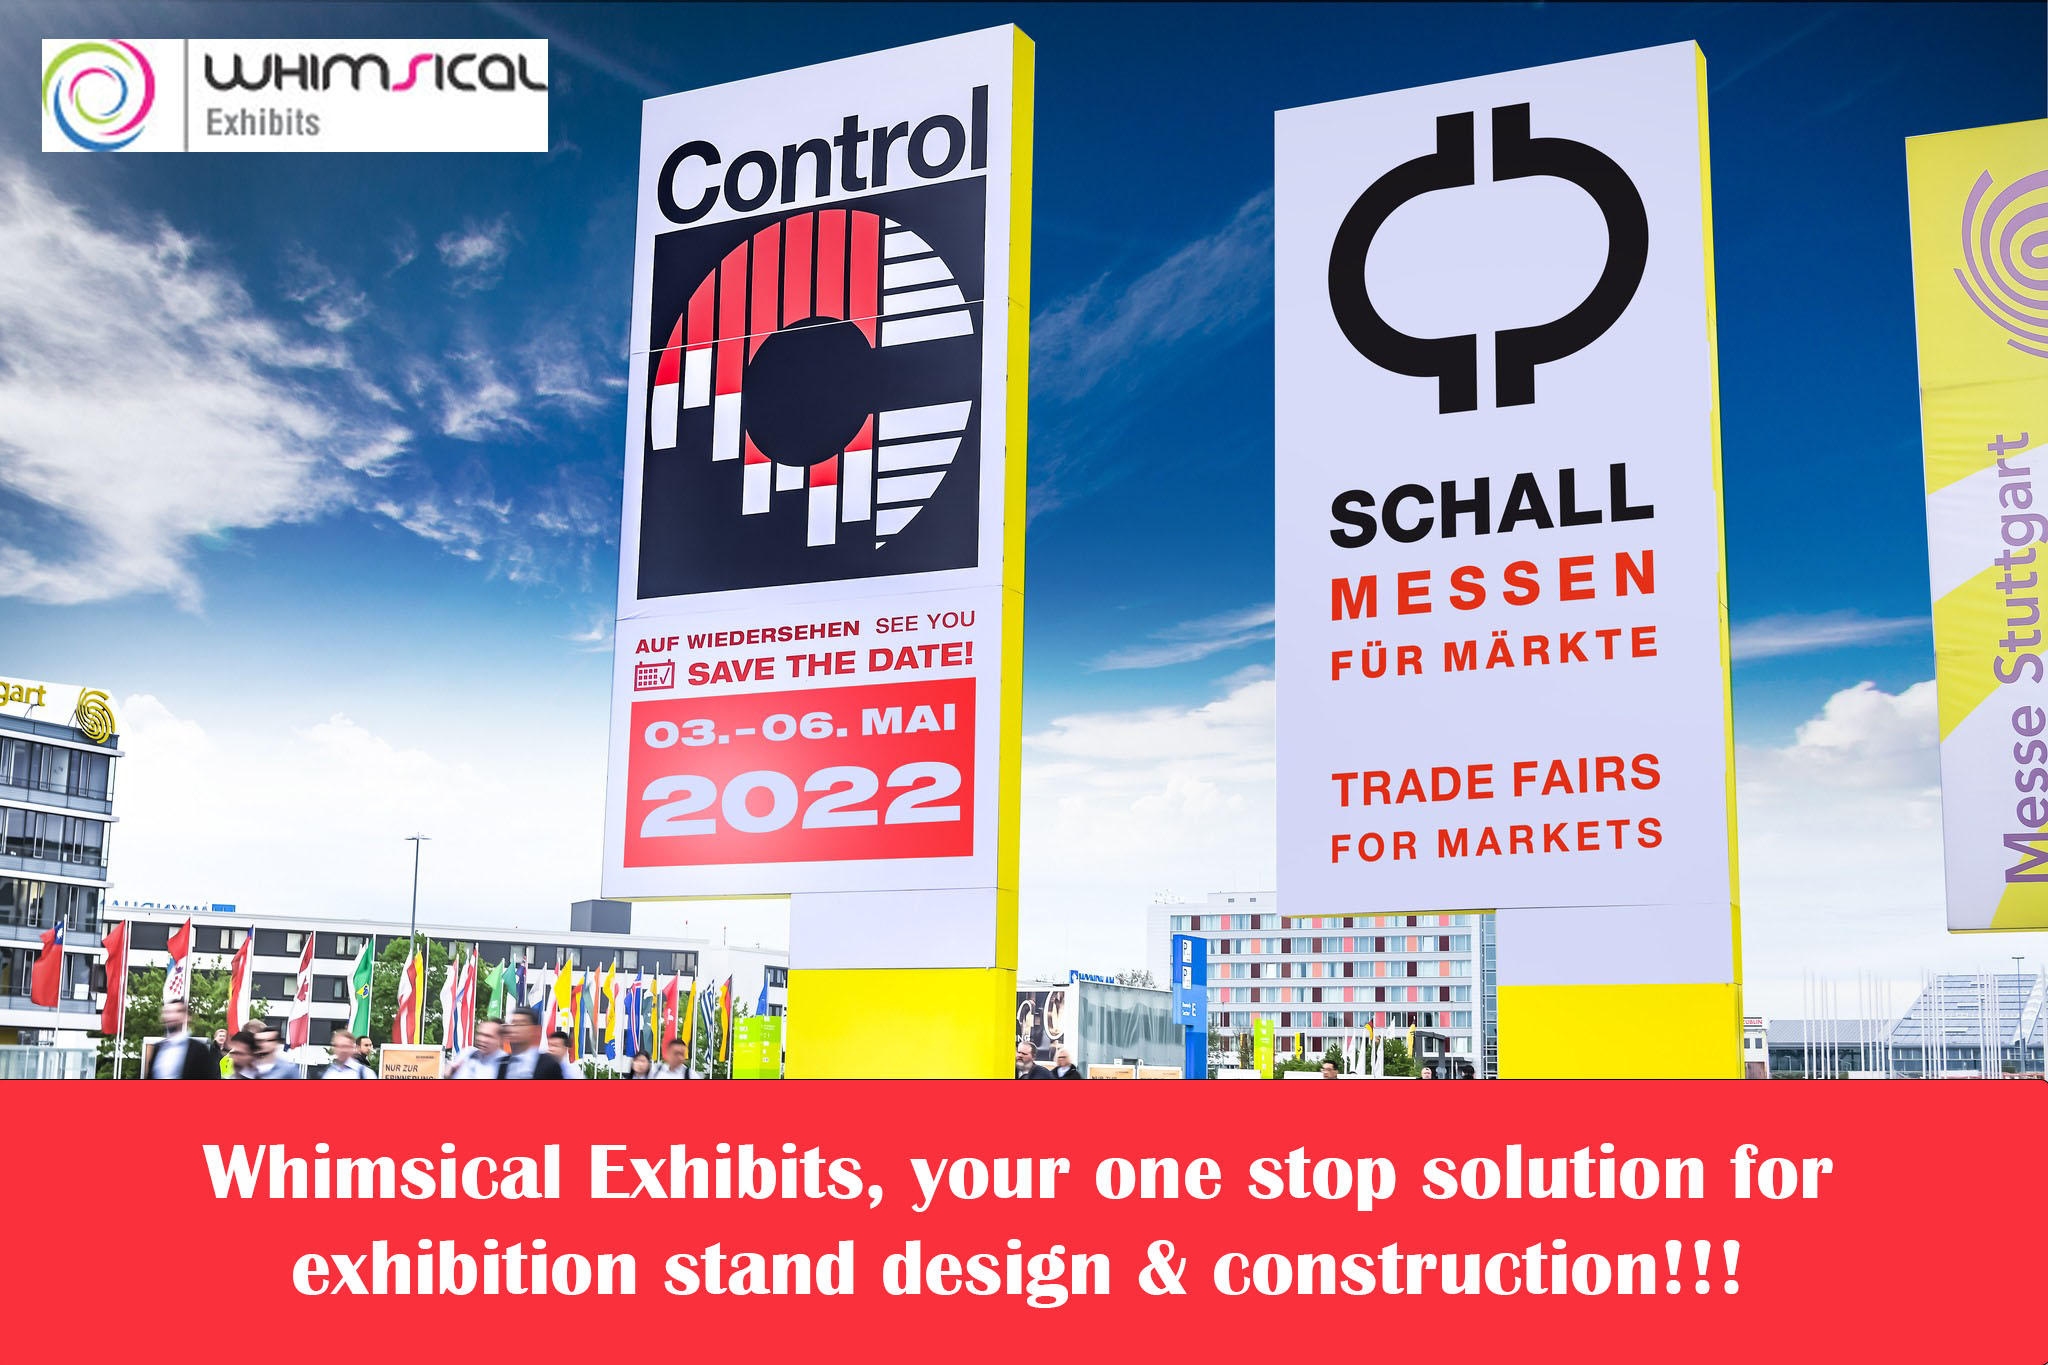 exhibition stand design for control 2022